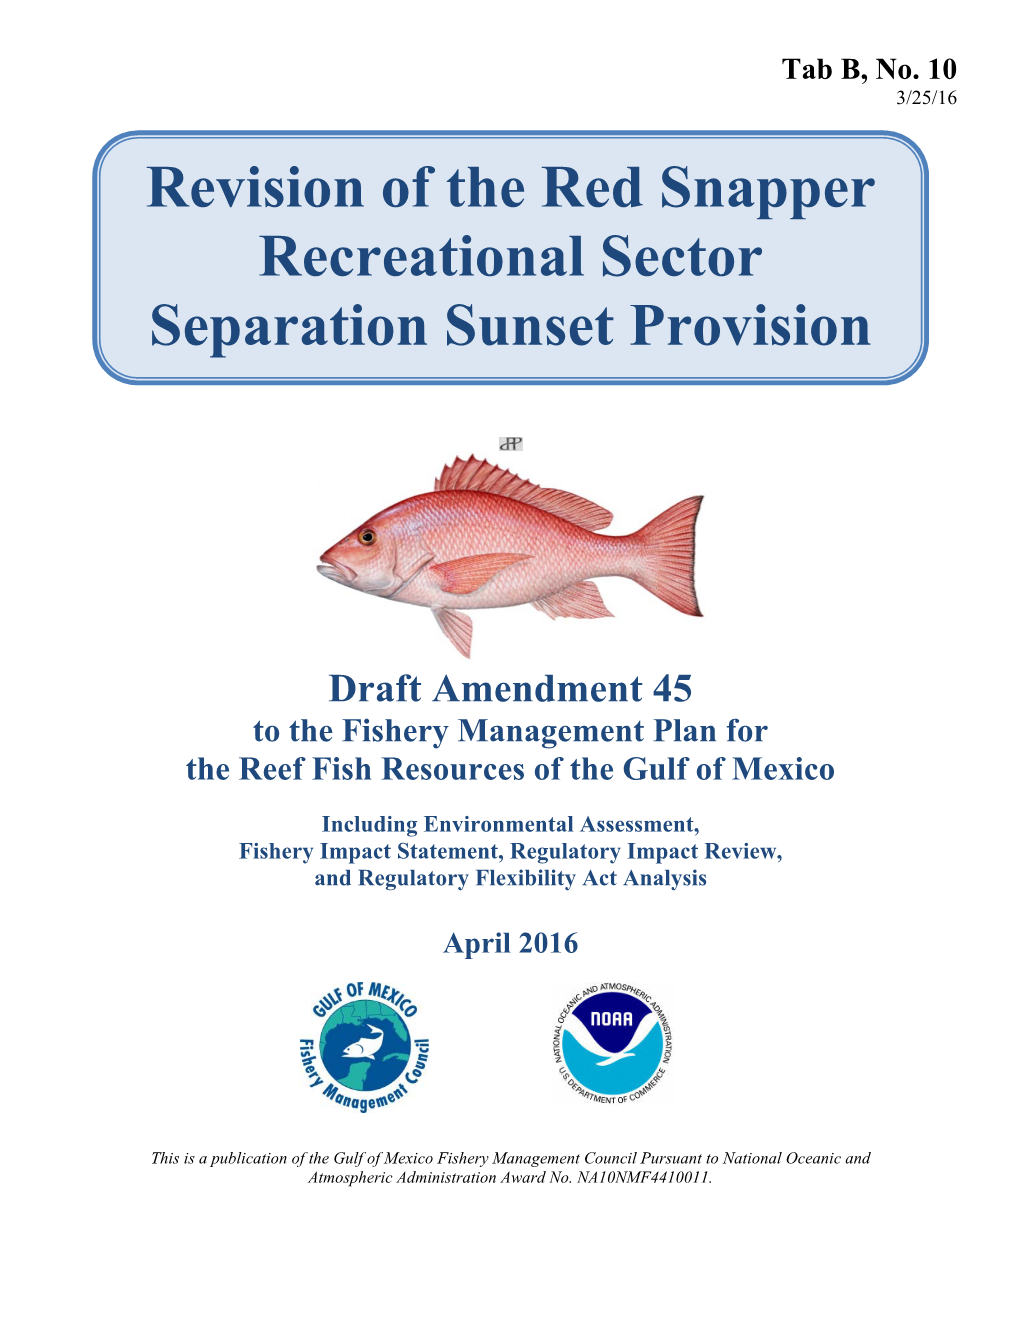 Revision of the Red Snapper Recreational Sector Separation